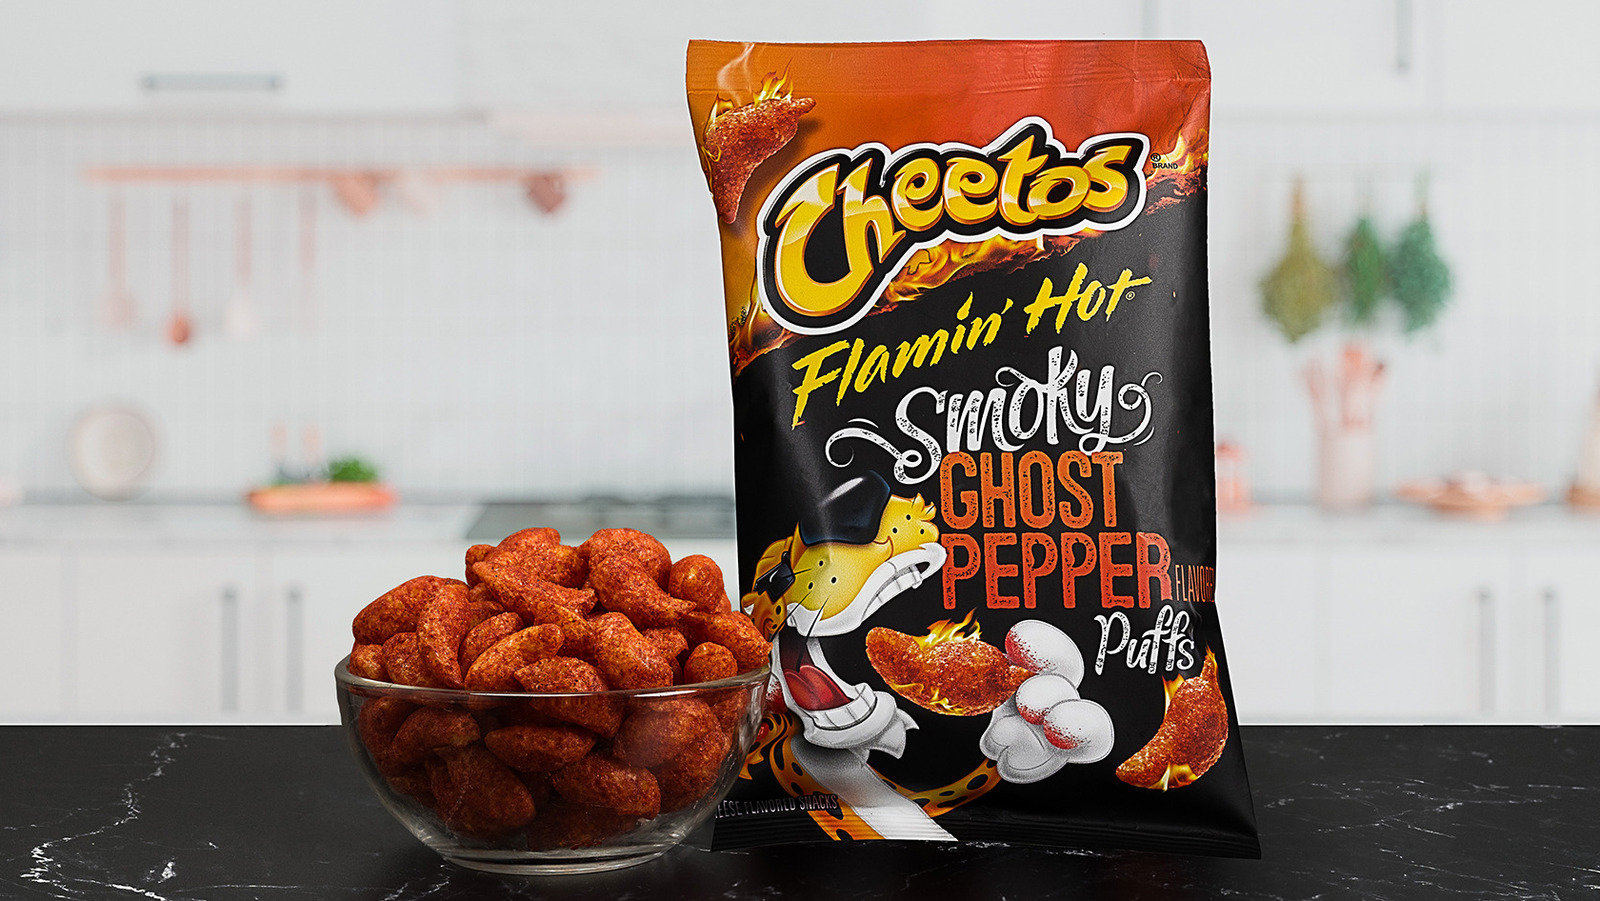 https://www.tastingtable.com/img/gallery/cheetos-announces-limited-edition-flamin-hot-smoky-ghost-pepper-puffs/l-intro-1684360132.jpg